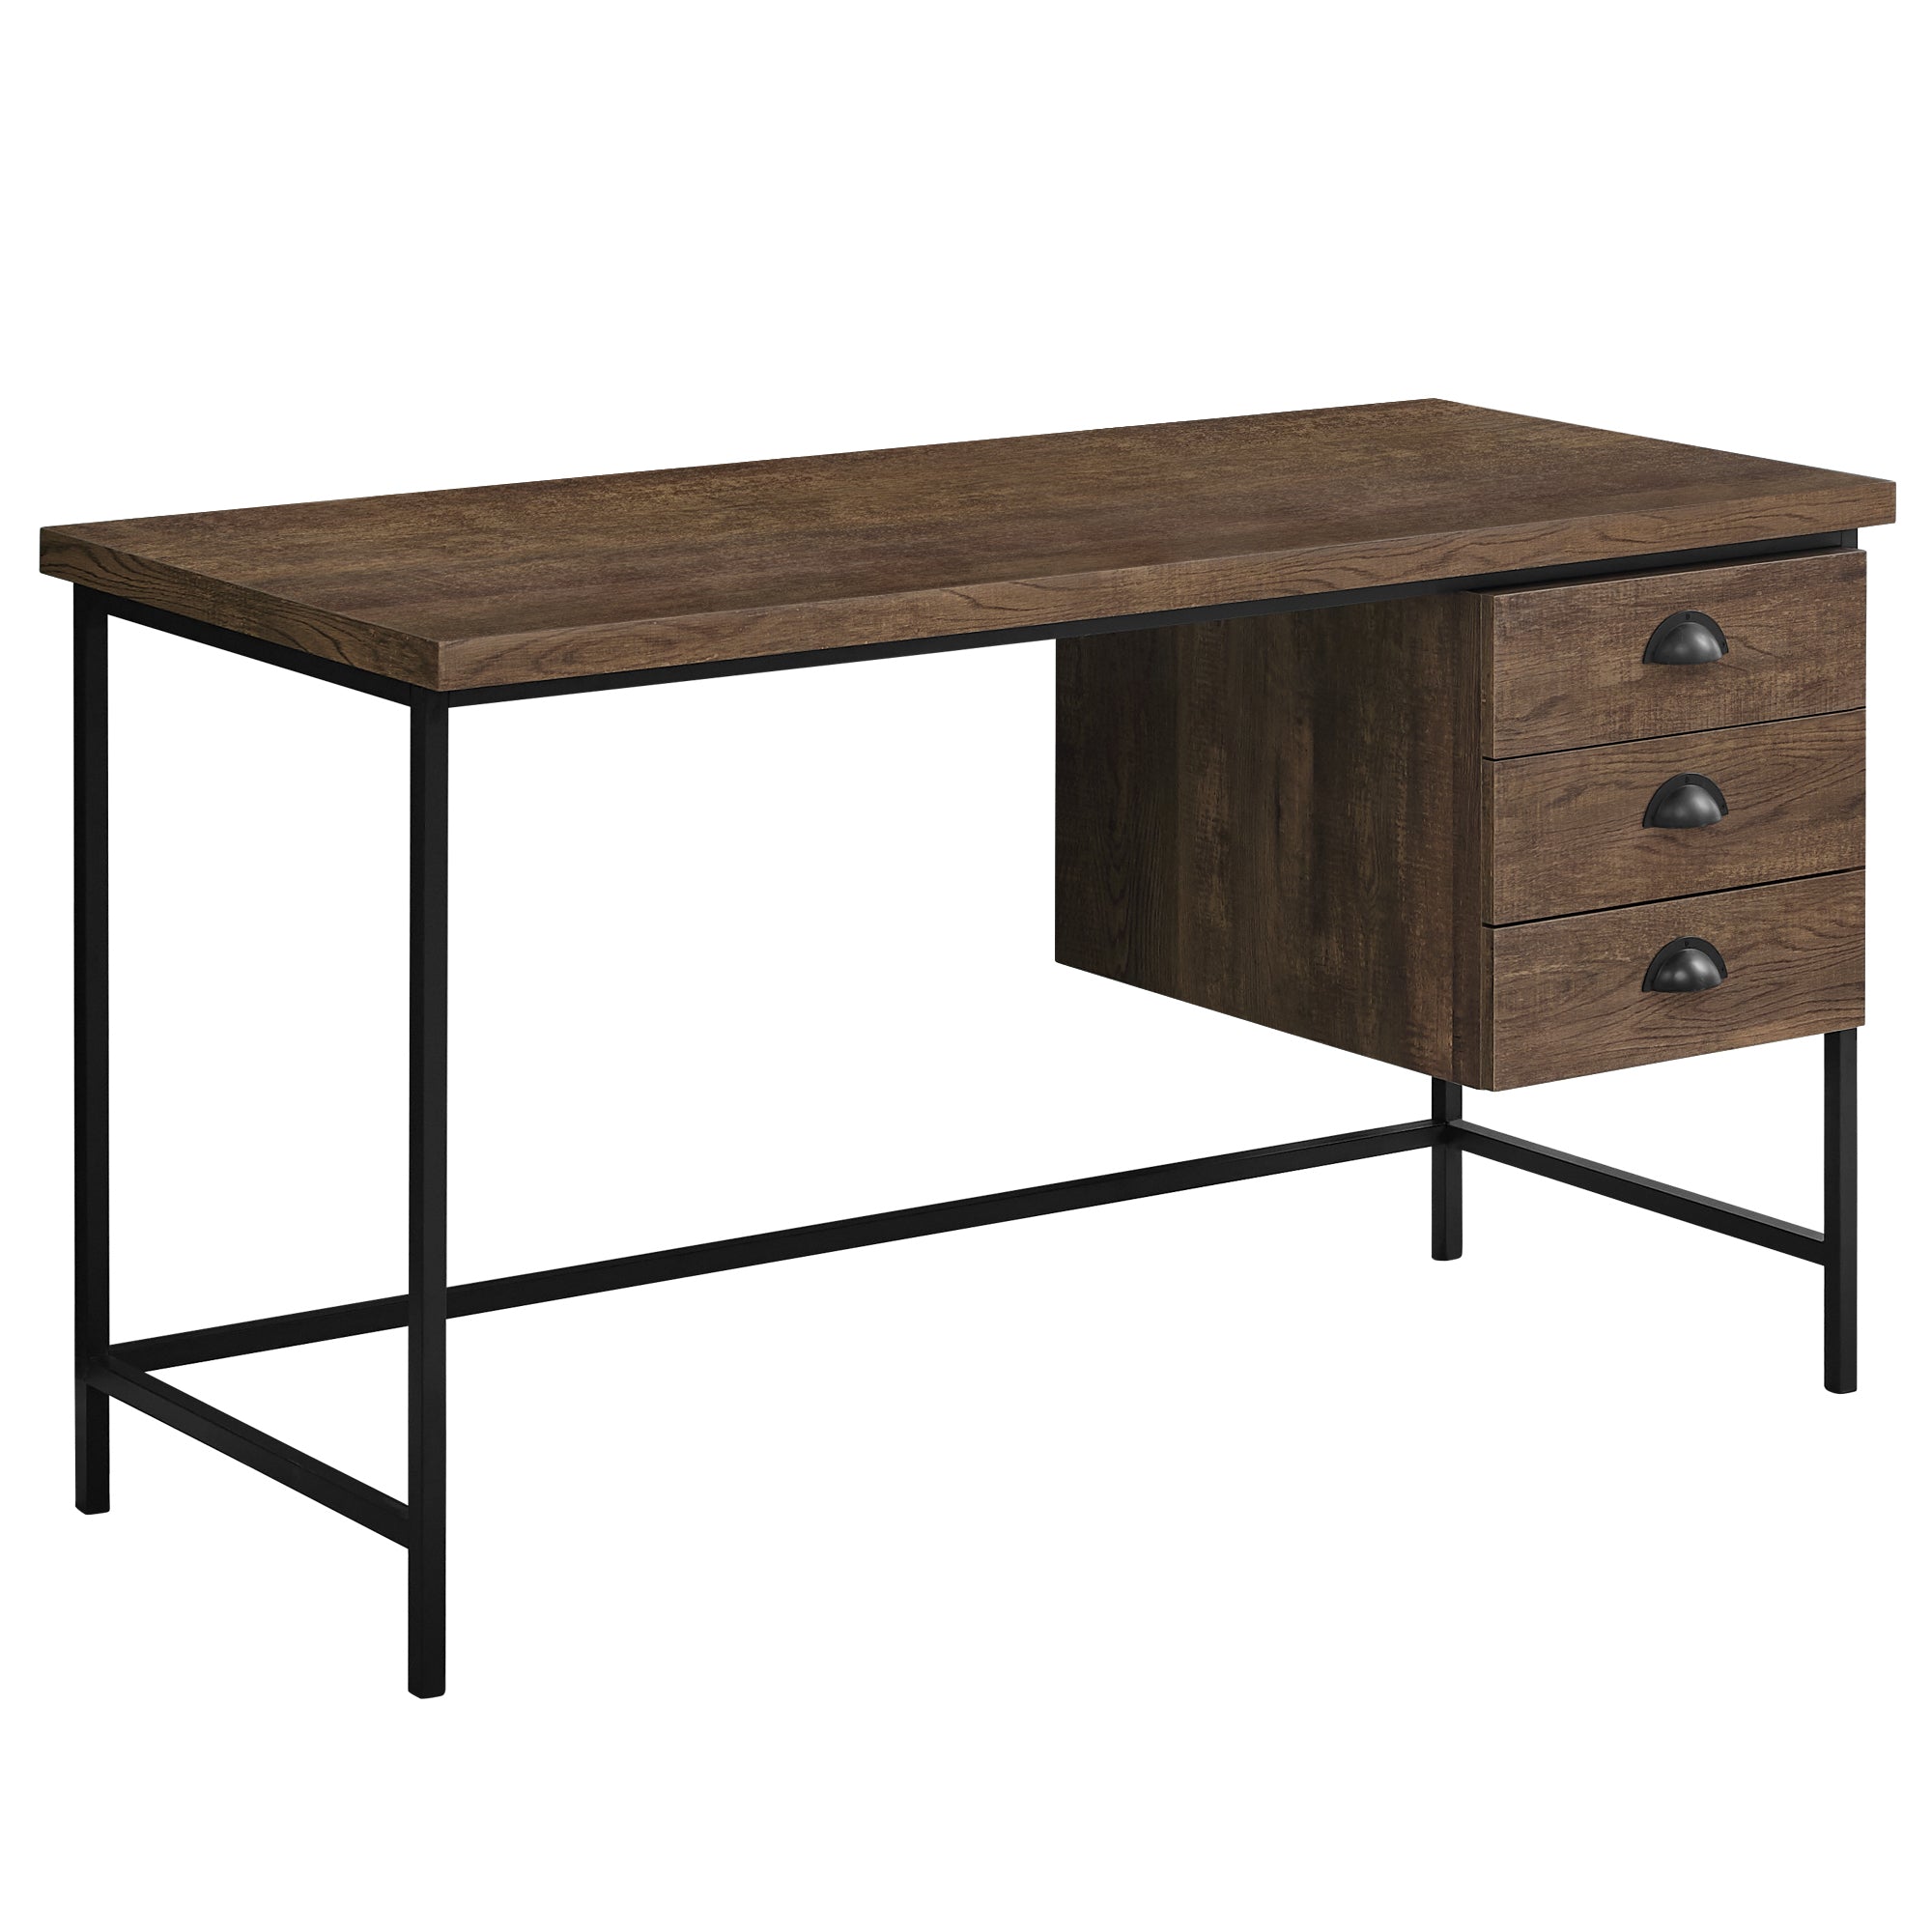 MN-377485    Computer Desk, Home Office, Laptop, Storage Drawers, 55"L, Metal, Laminate, Brown Reclaimed Wood Look, Black, Contemporary, Modern